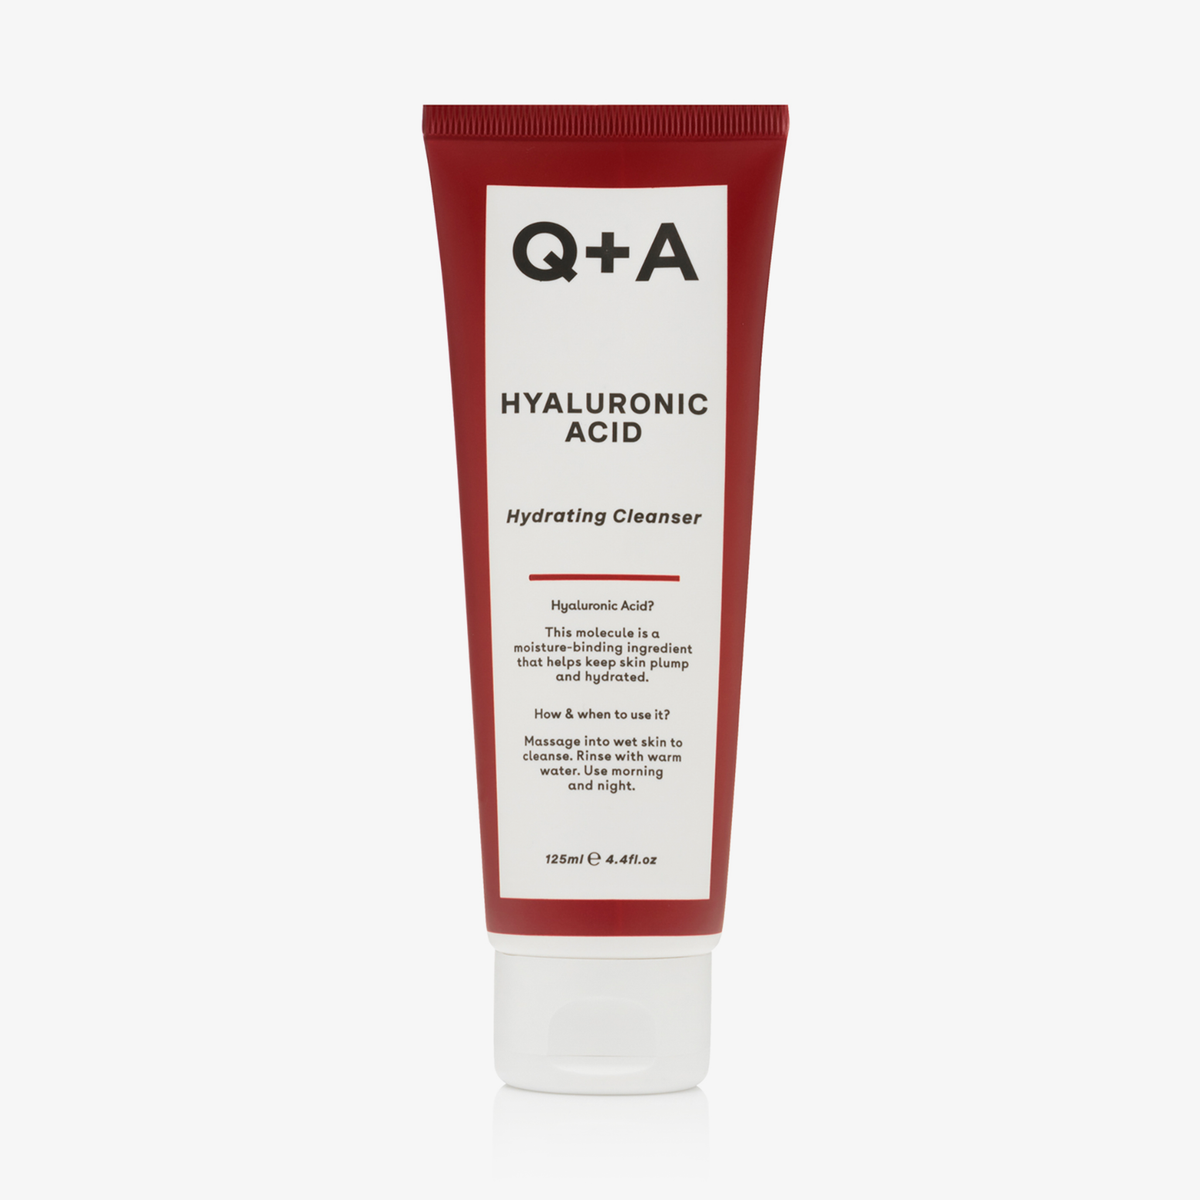 Hyaluronic Acid Hydrating Cleanser